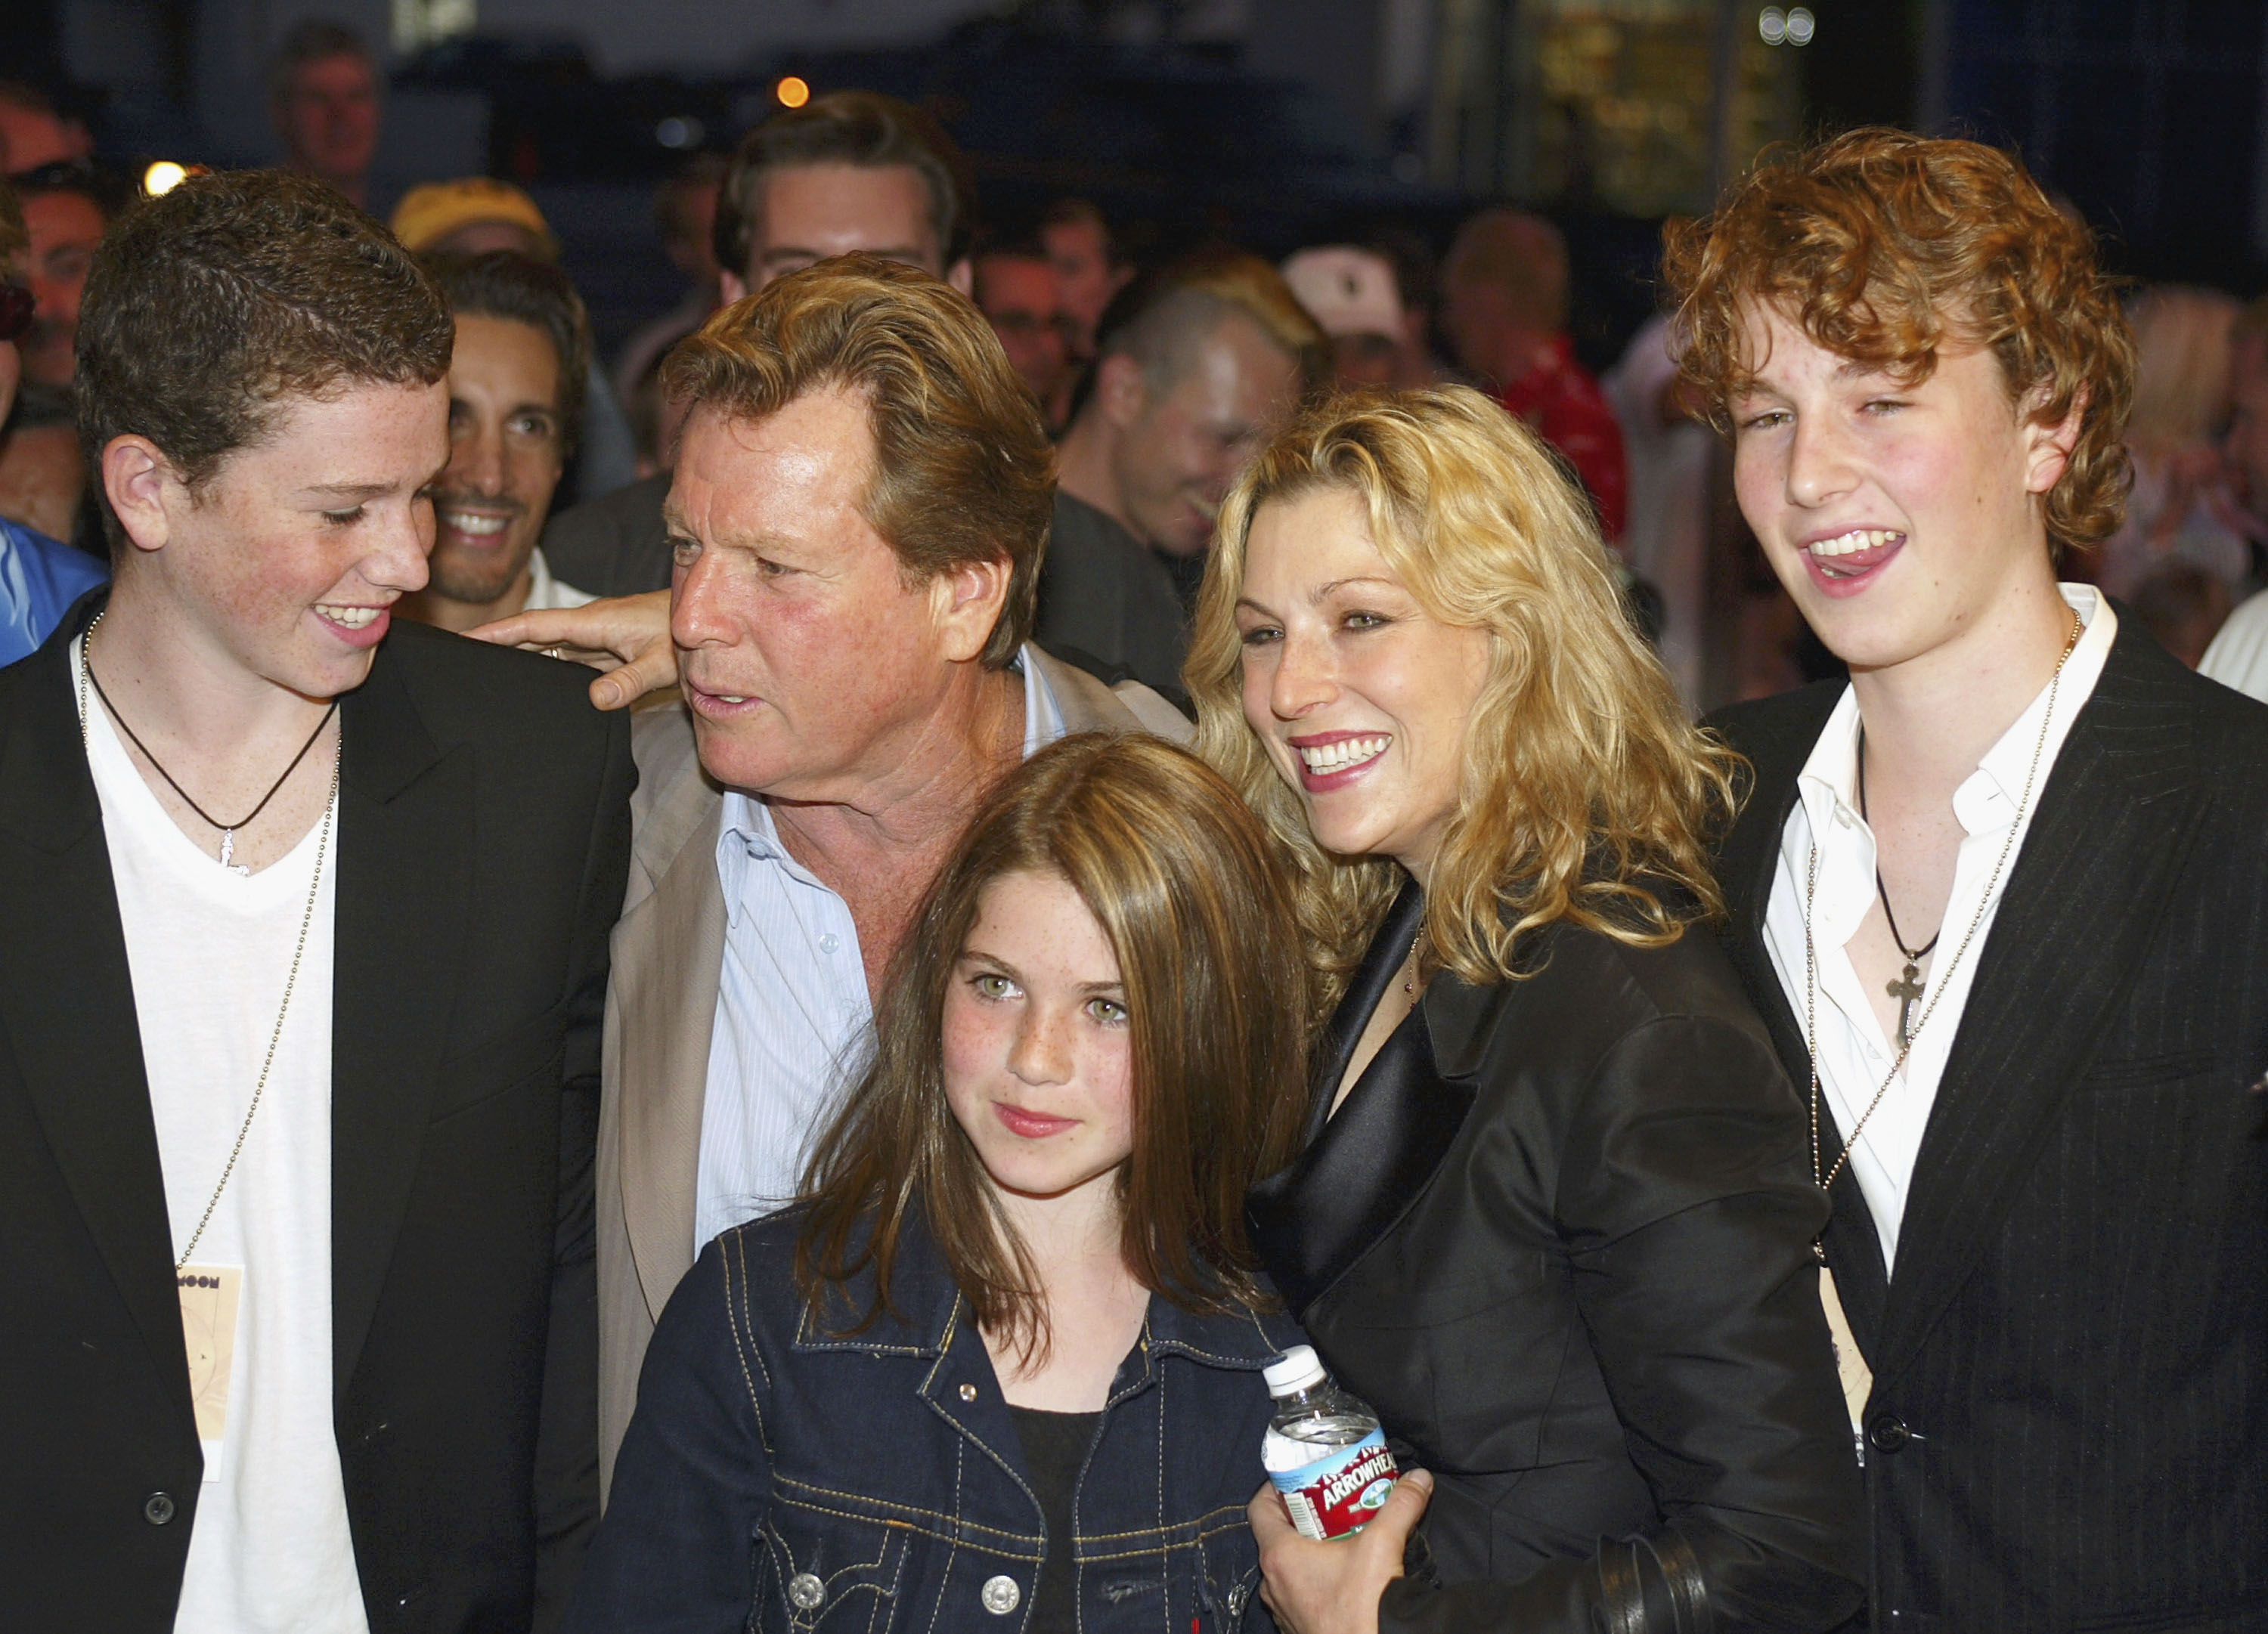  Ryan O'Neal, his daughter, Tatum O'Neal and her children Sean, Emily and Kevin McEnroe  in Los Angeles in 2003 | Source: Getty Images